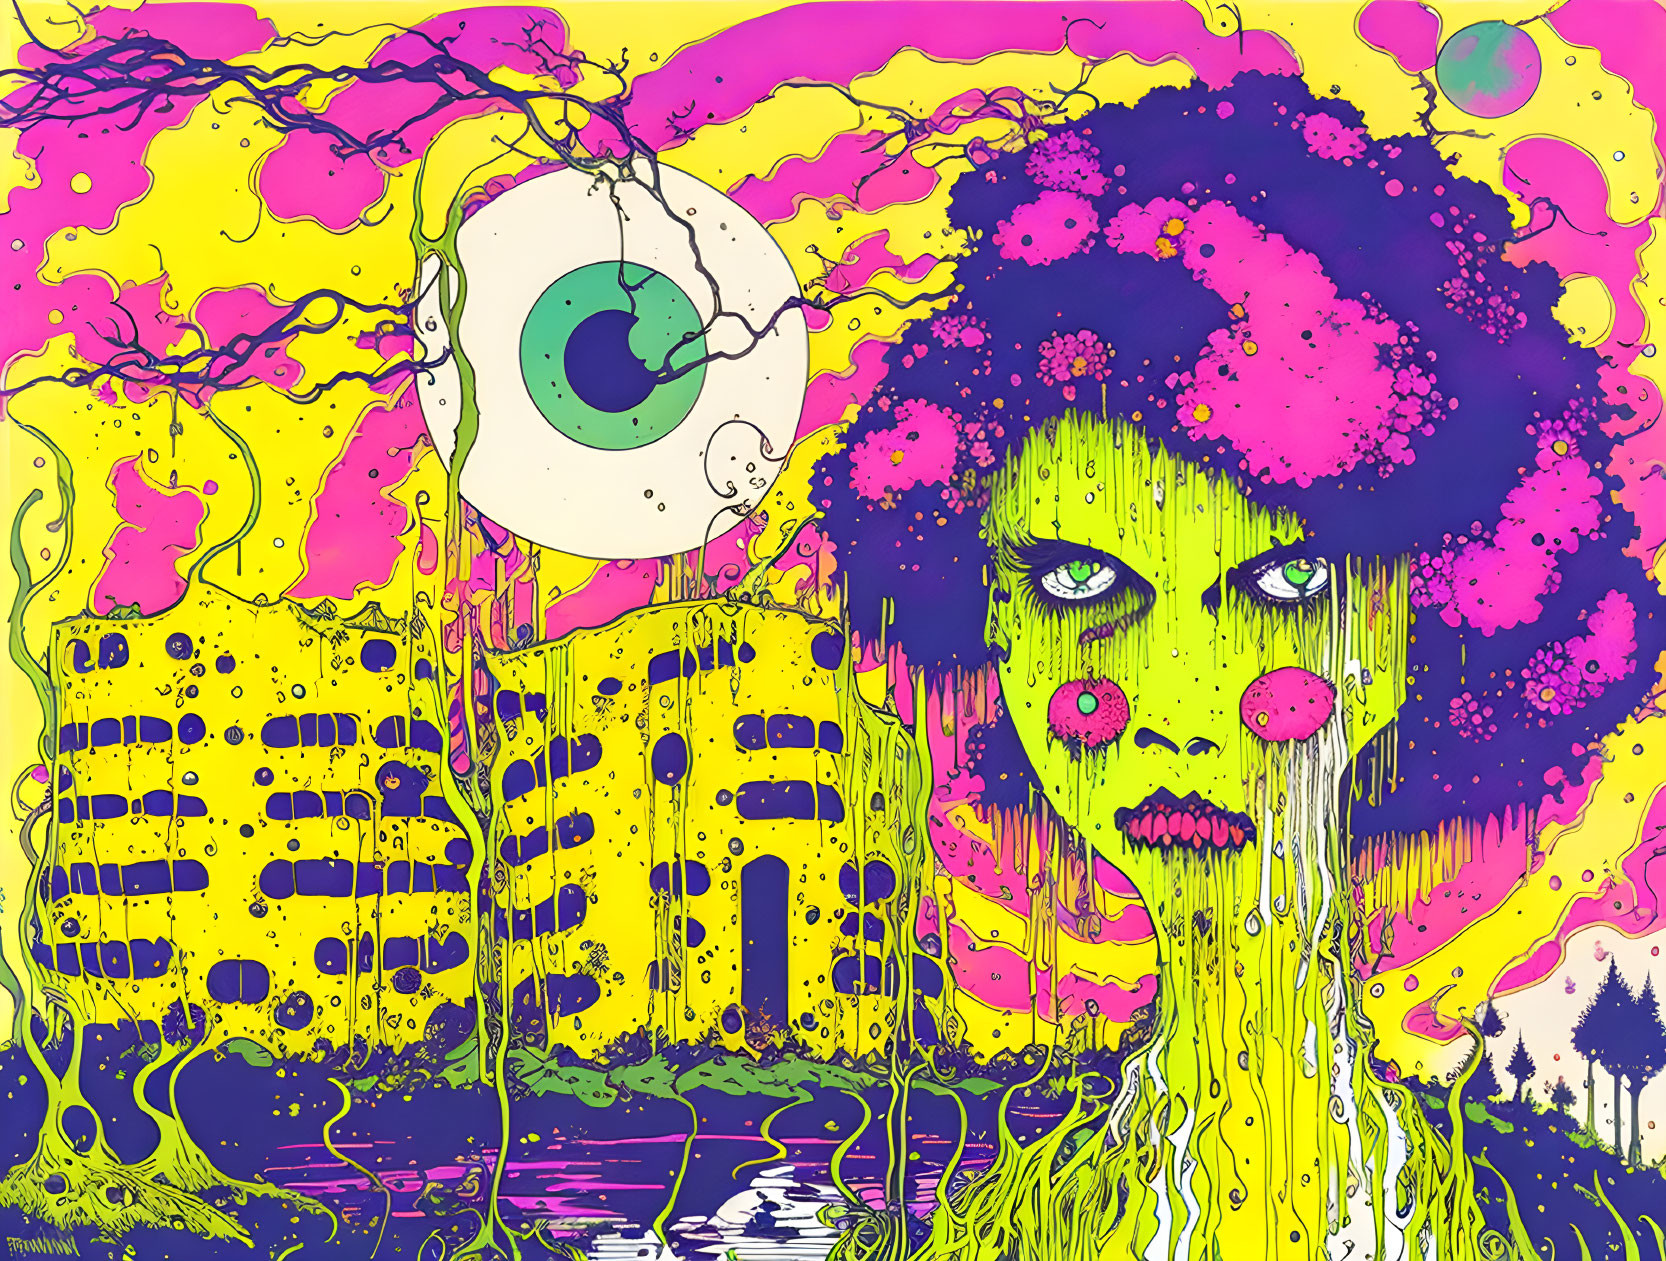 Colorful Psychedelic Illustration: Green-Skinned Female Figure with Magenta Hair, Eye